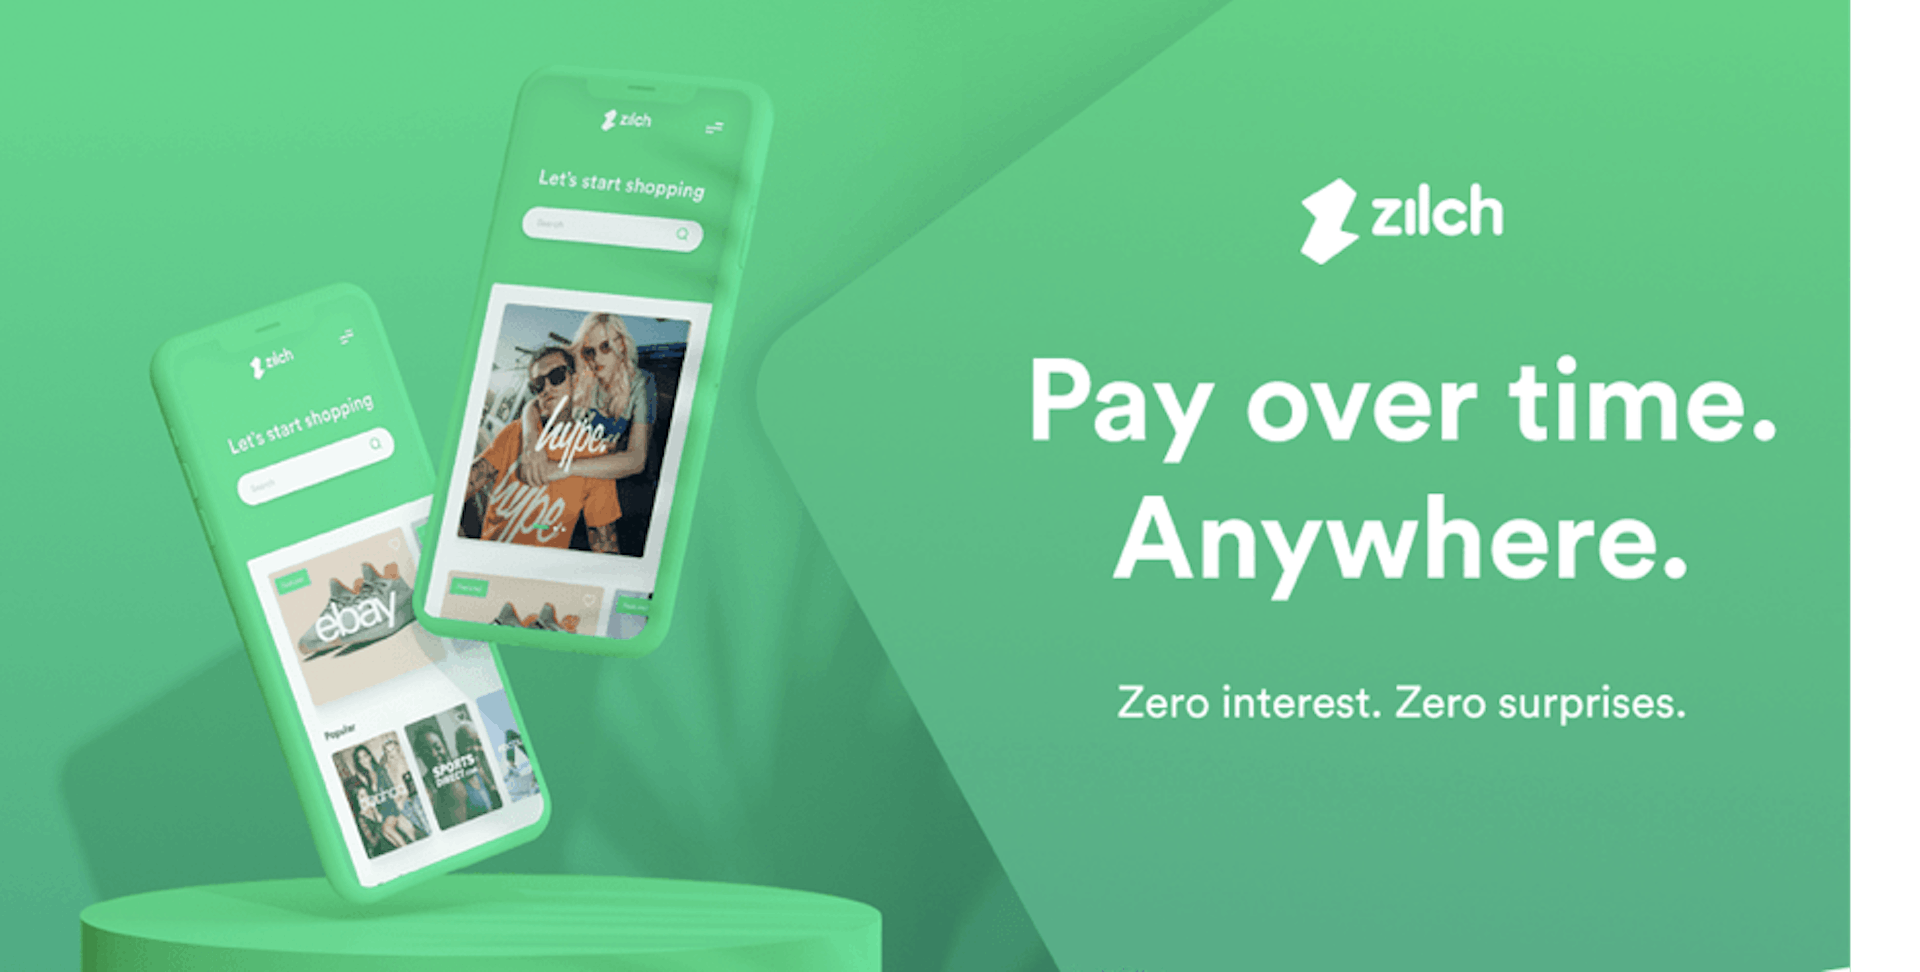 Zilch has disrupted the BNPL (Buy Now Pay Later)